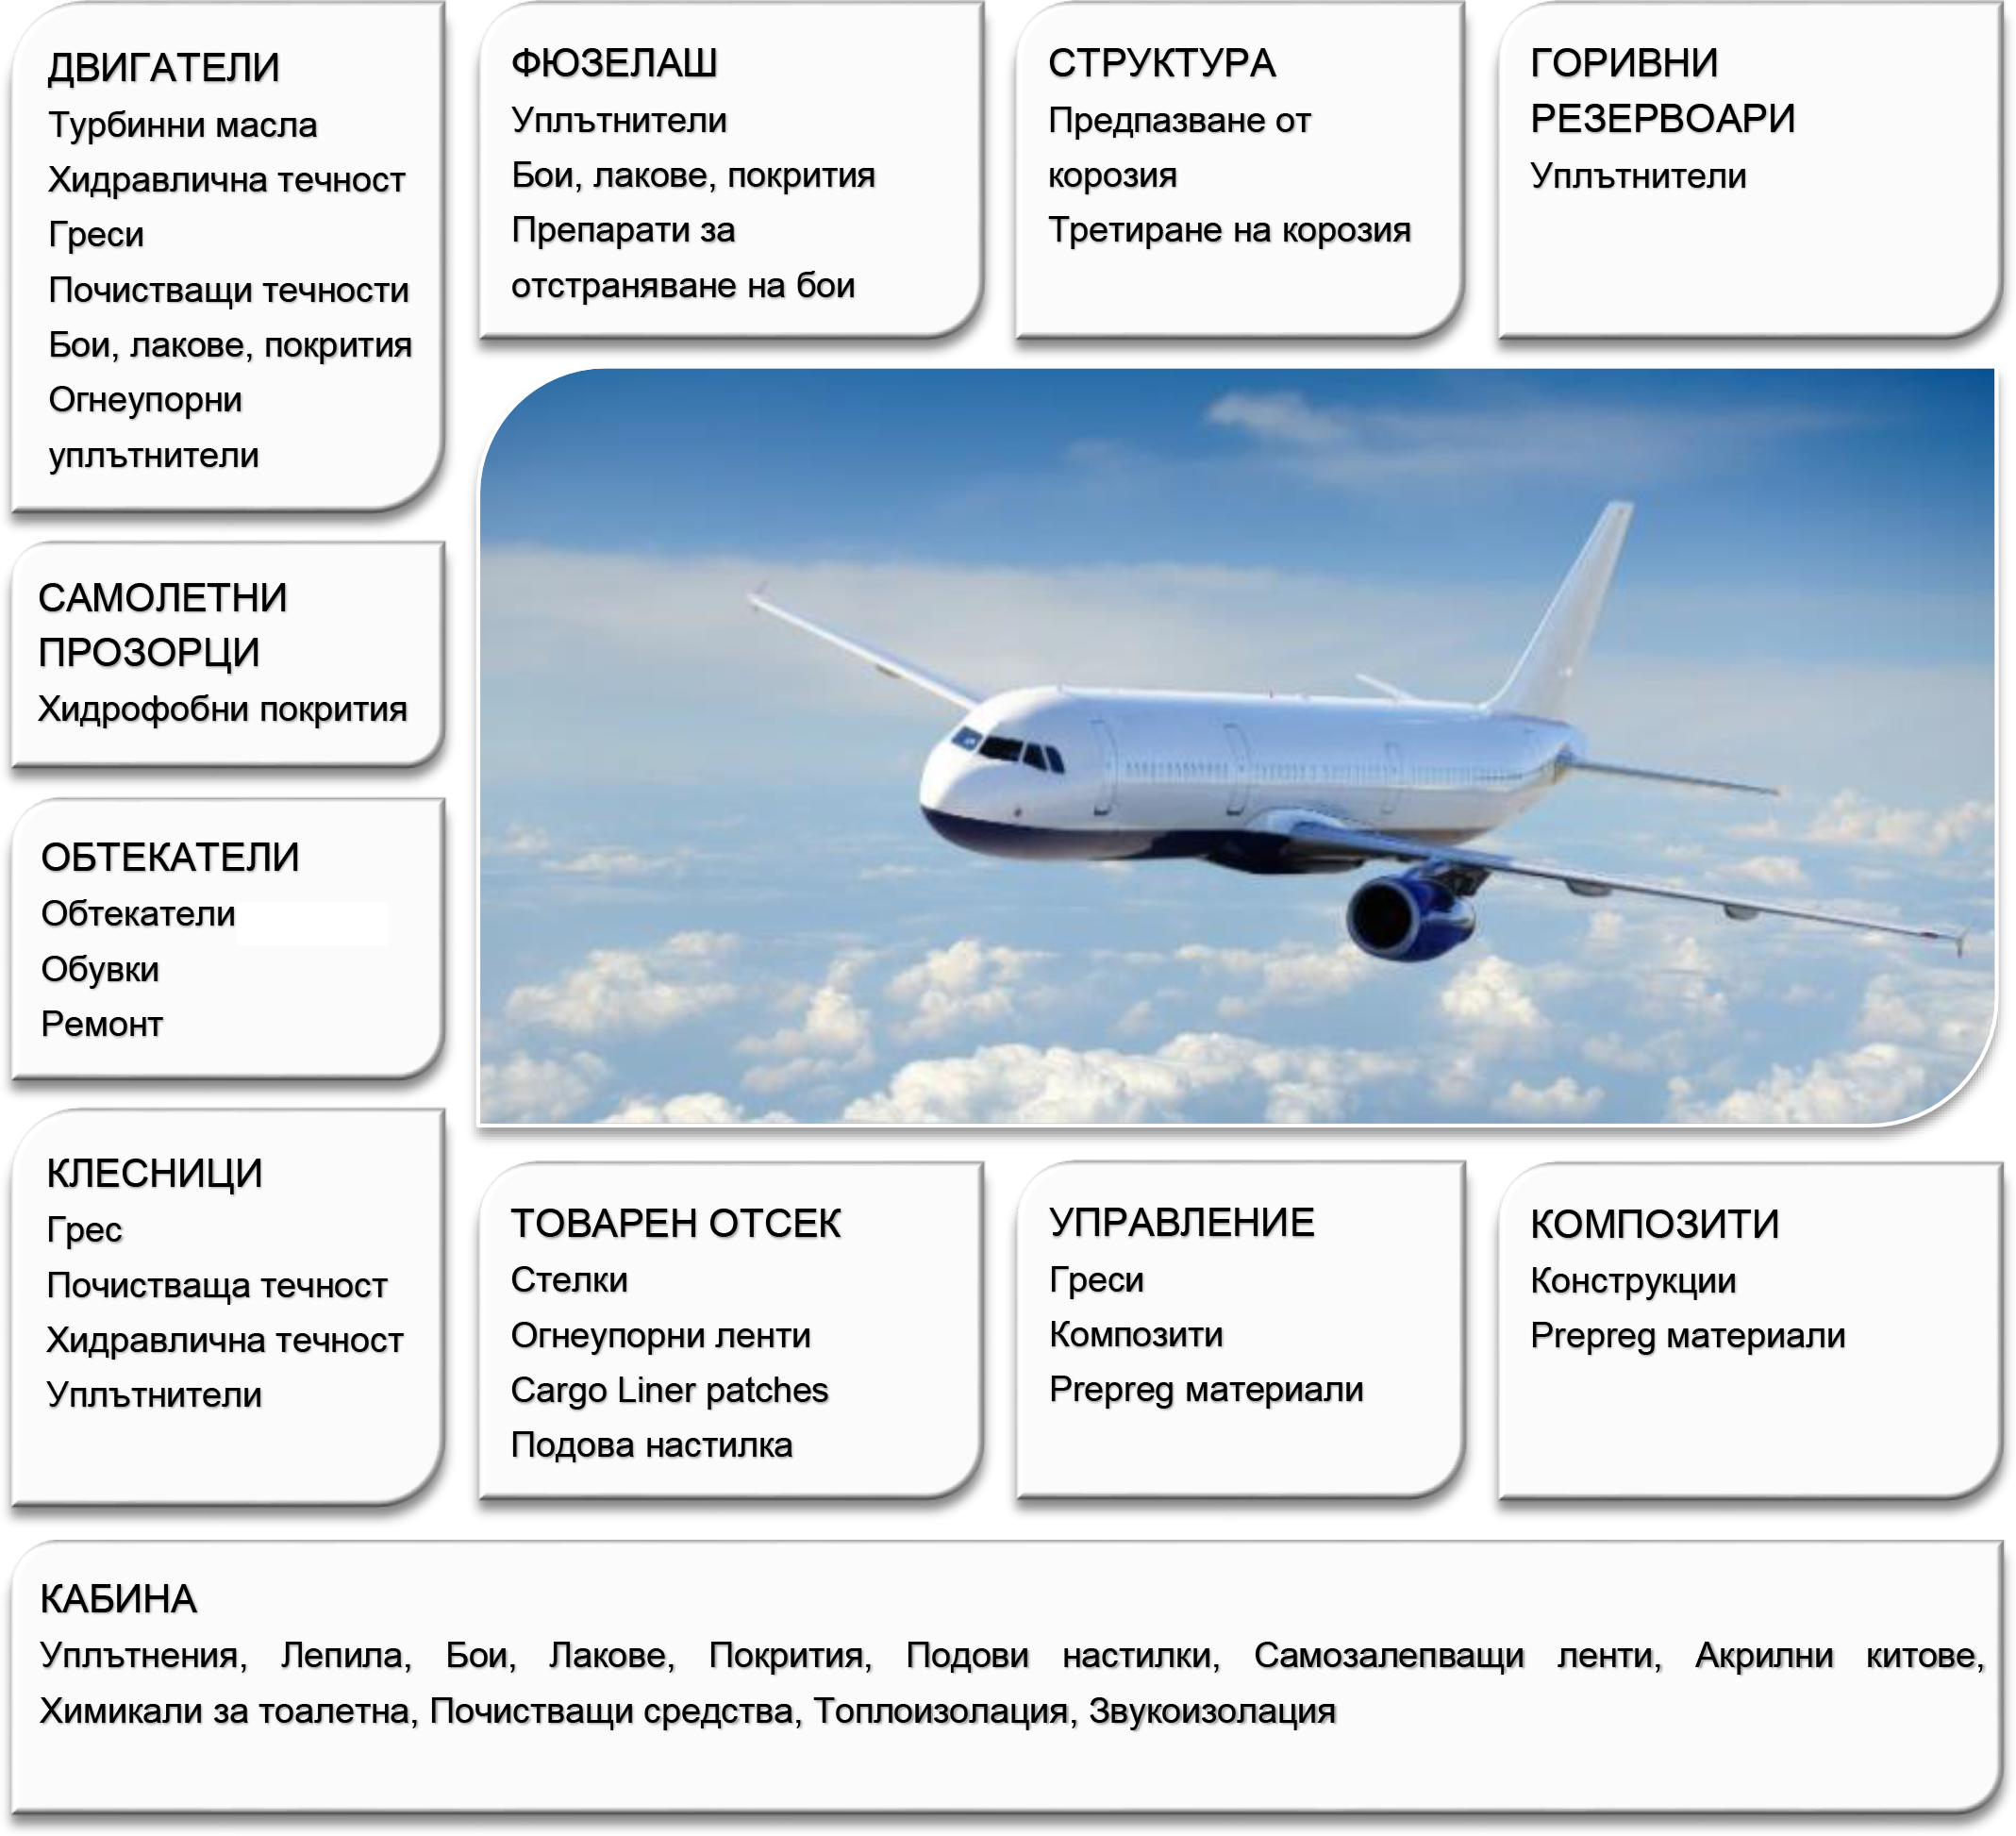 291-aviation-products-bg-1-16611500517582.png